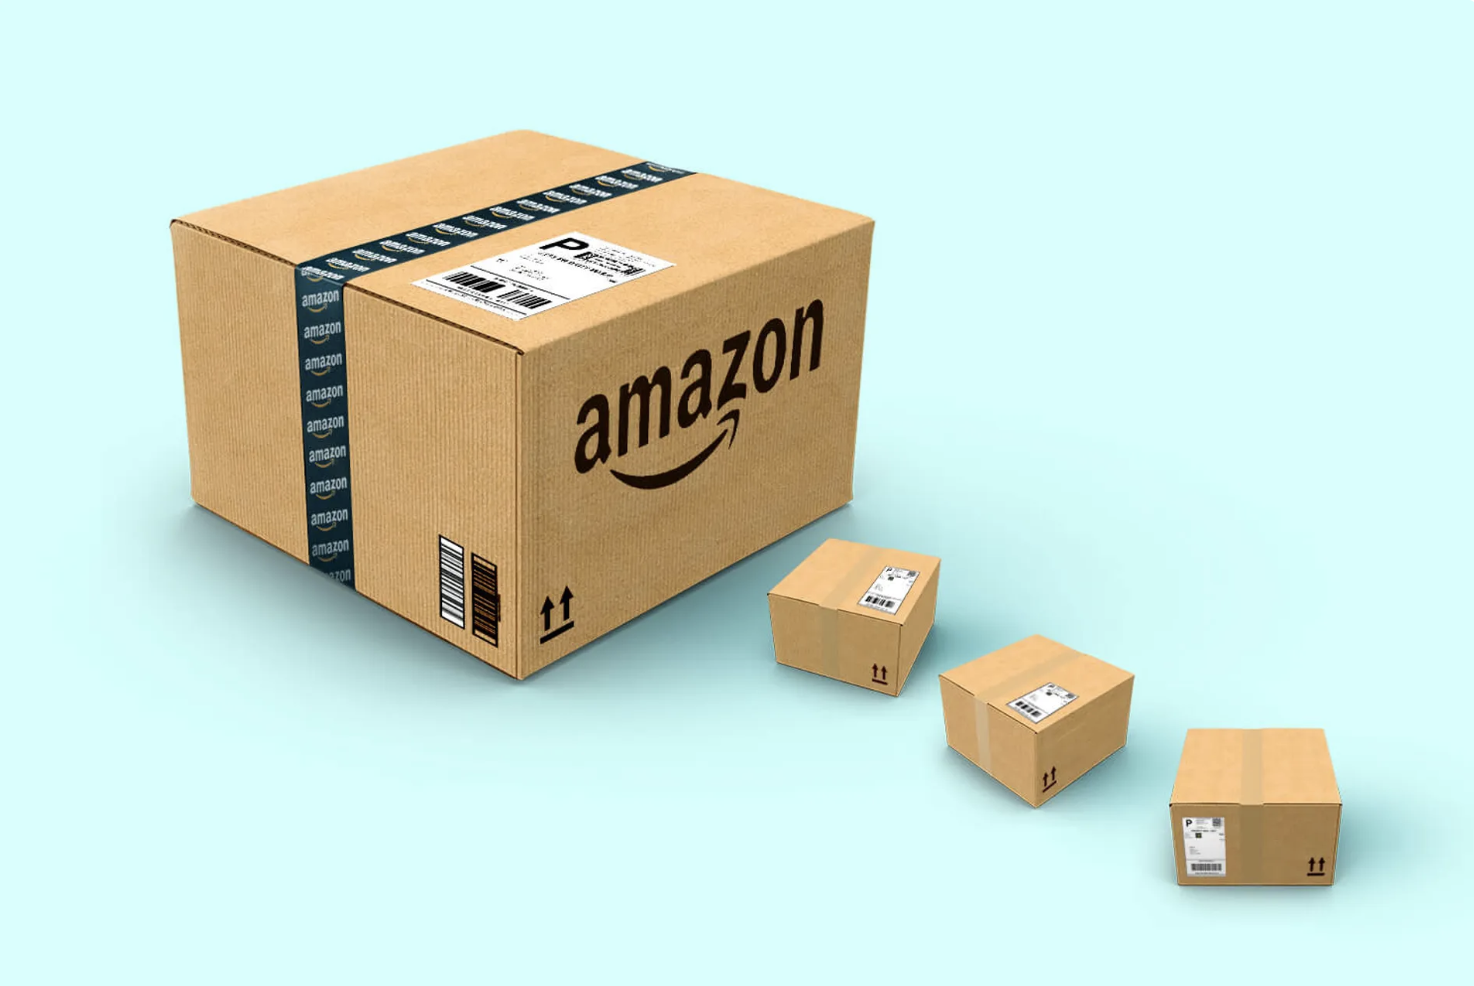 How to Refuse Delivery of an Amazon Package?